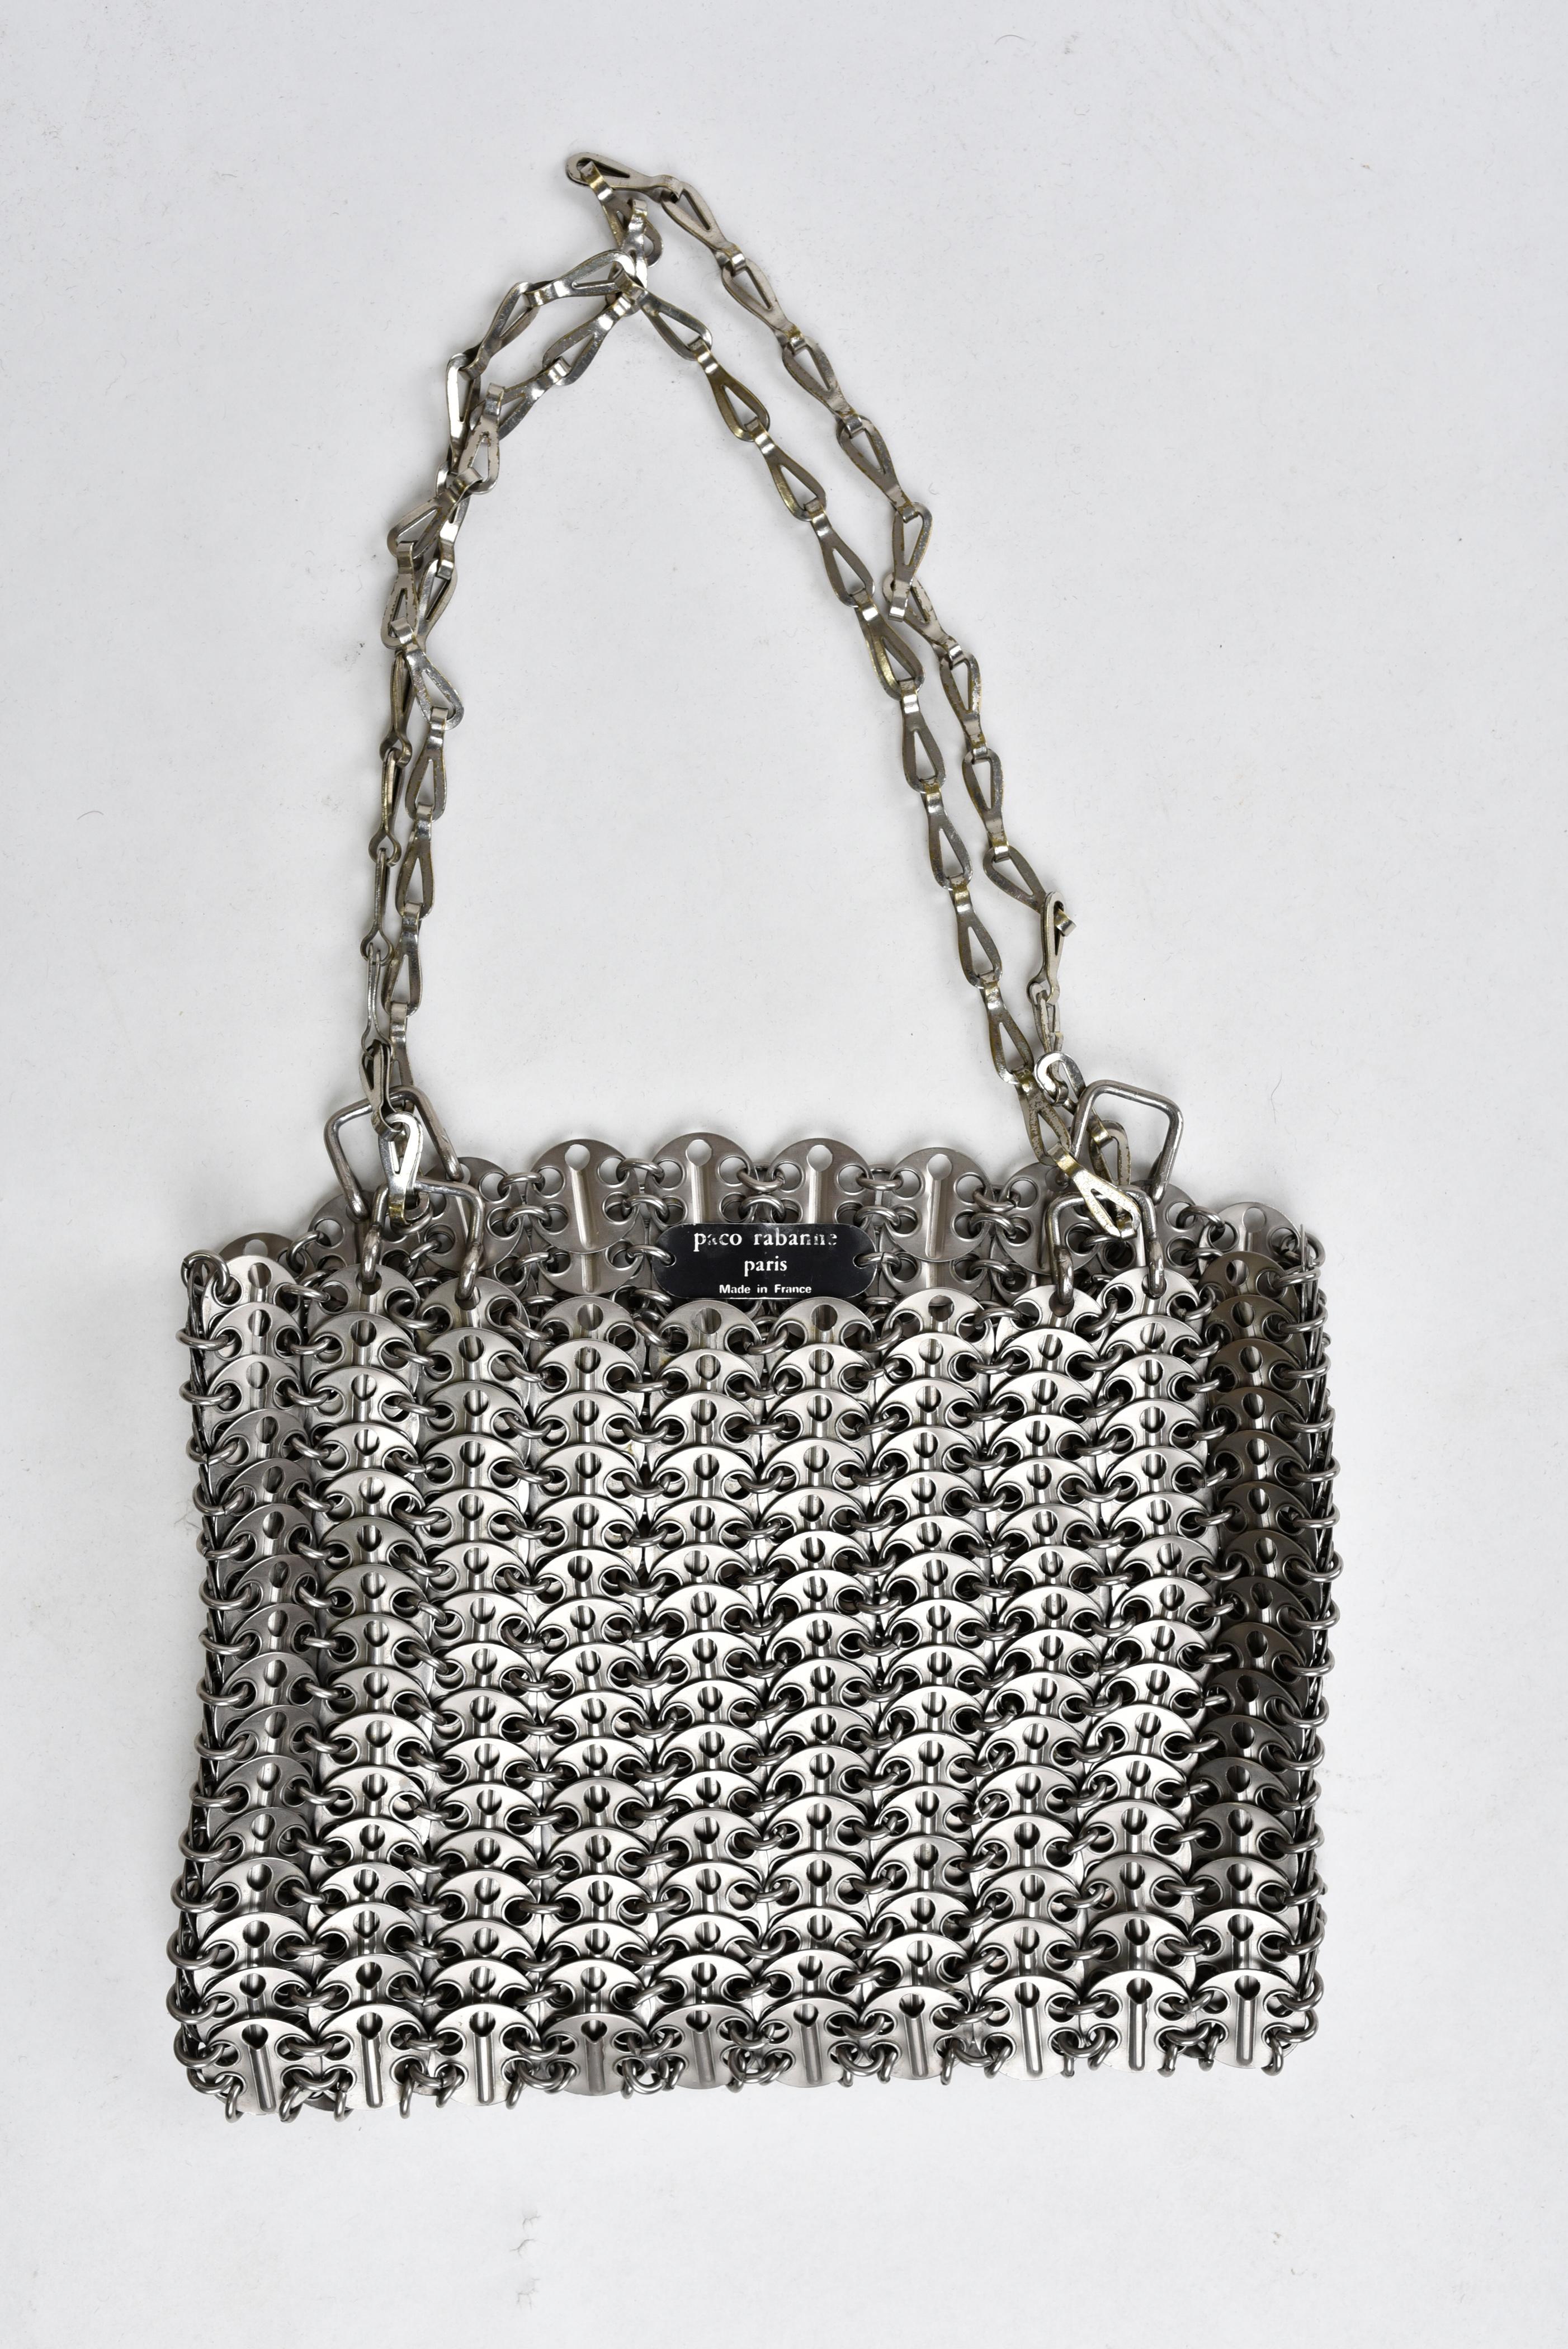 Circa 1969

France

Iconic shoulder bag by Paco Rabanne dating from the late 1960s. Besace structure in perforated metal discs maintained by rings. Original sliding chain allowing the bag in hand or shoulder. Black metal claw indicating Paco Rabanne